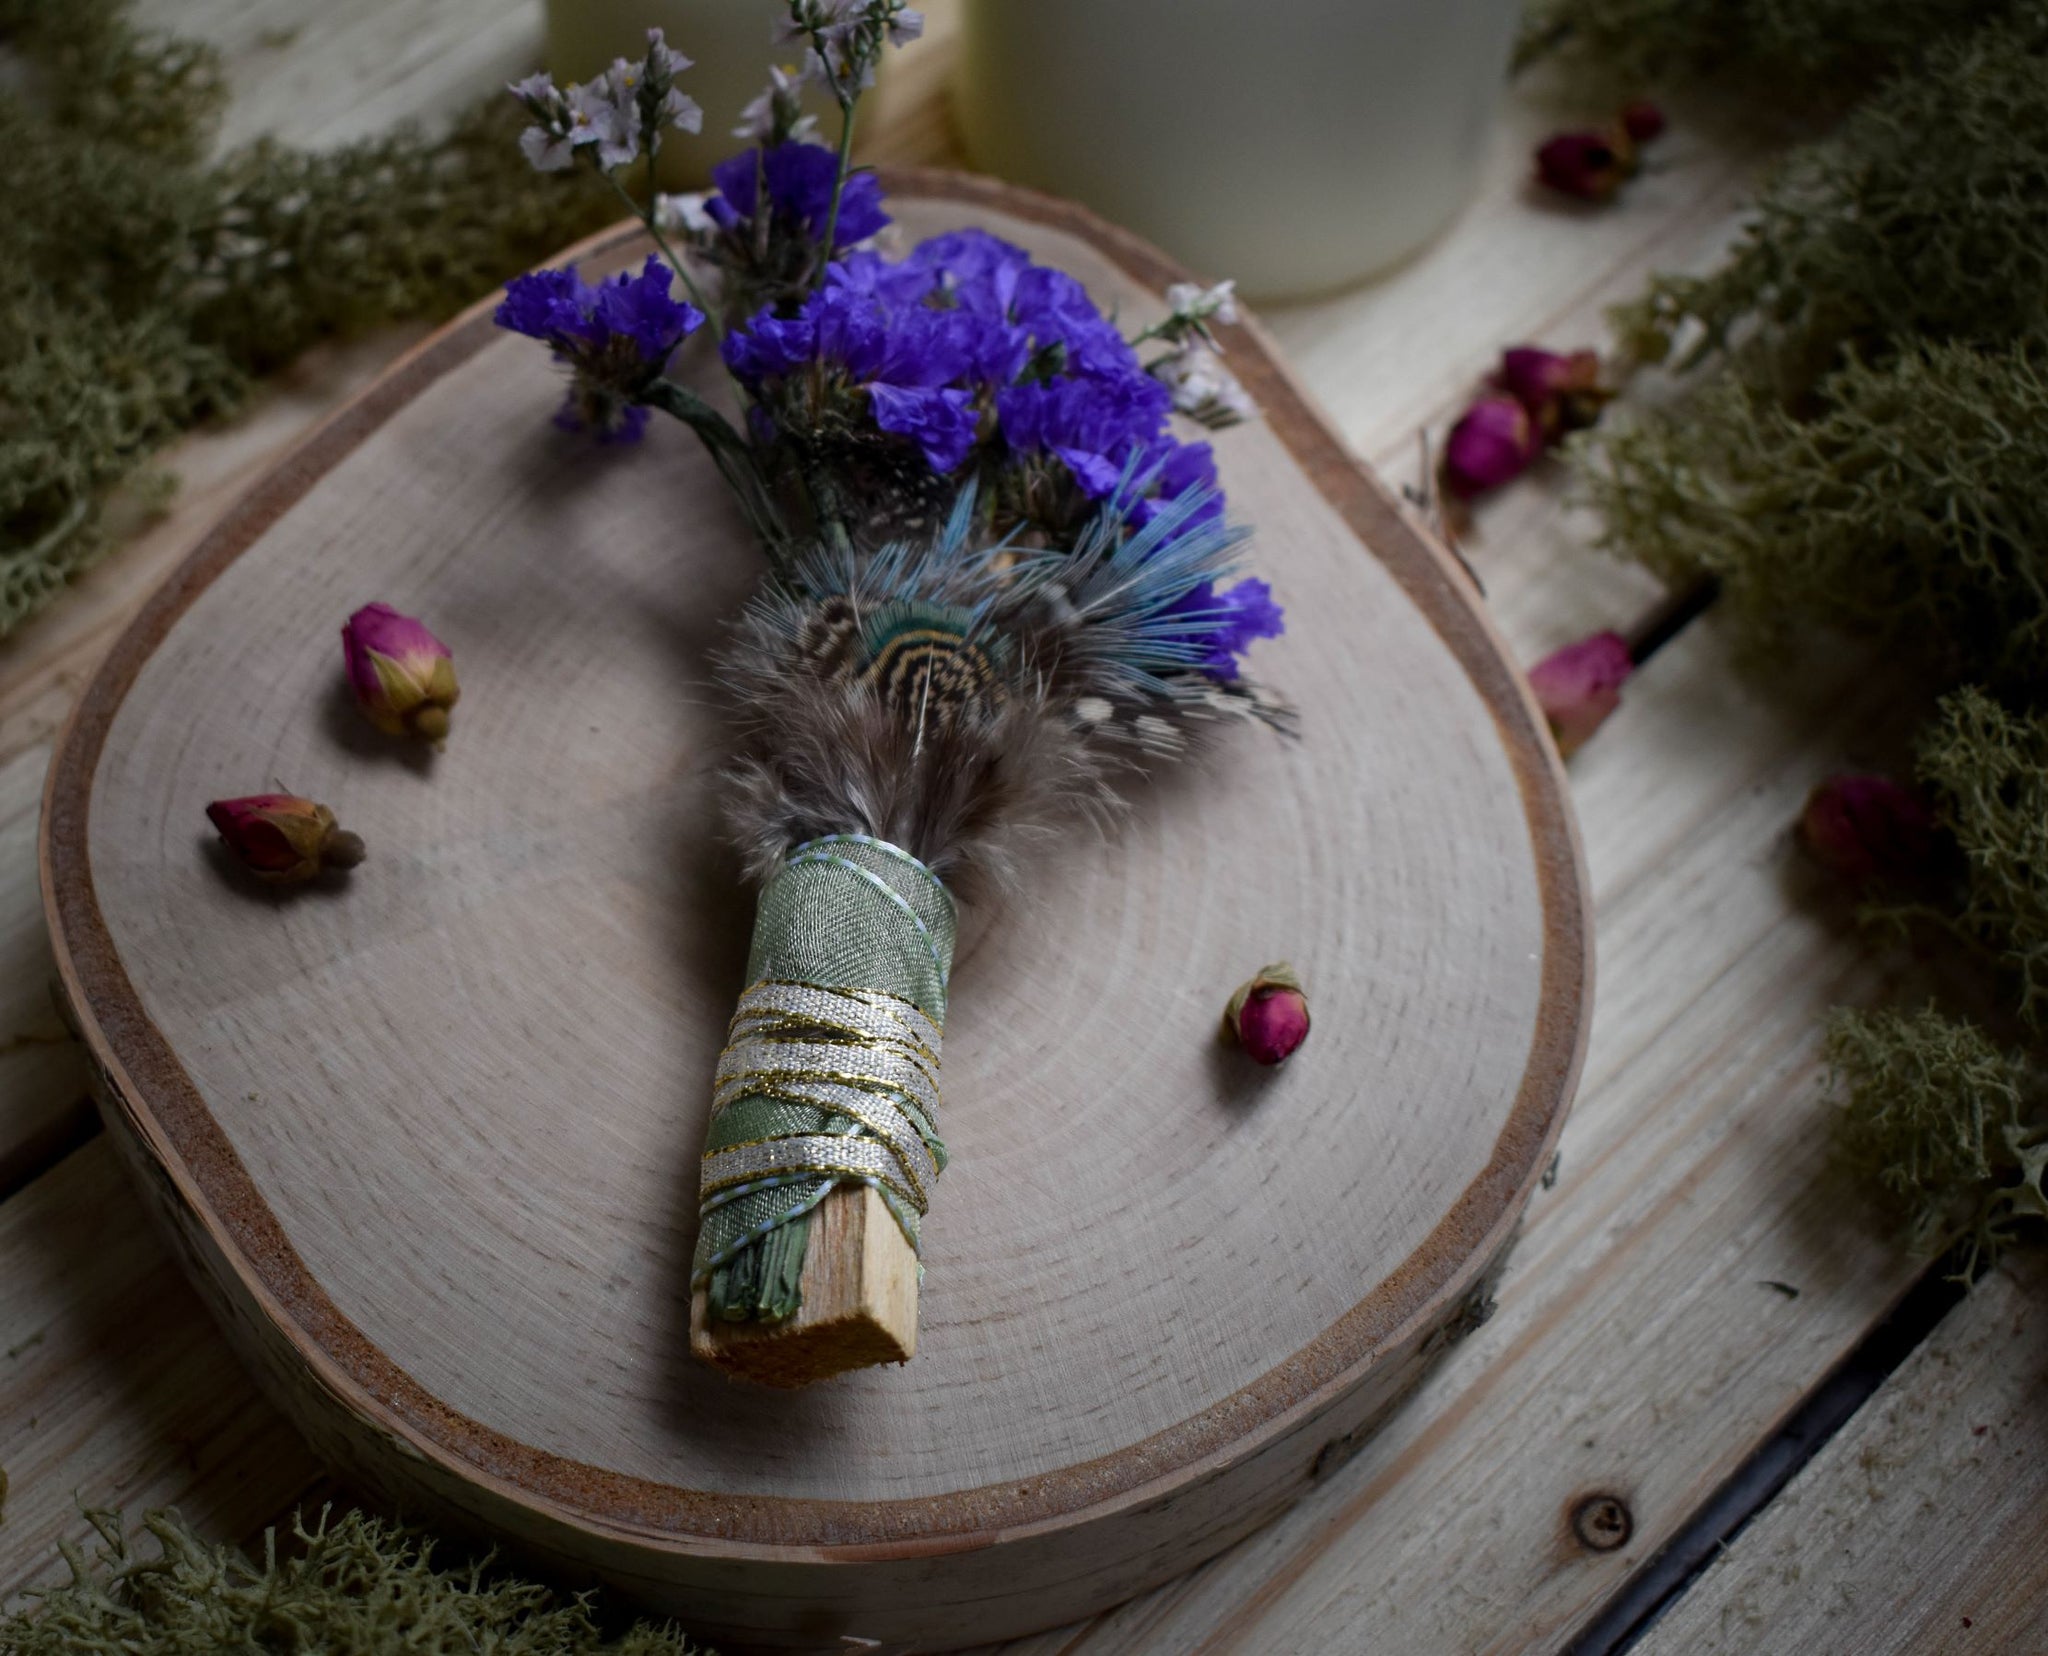 Use this handcrafted Palo Santo smudge bundle to transmute negative energy, and remove bacteria and toxins. Burn Palo Santo to enhance creativity, reduce stress and anxiety, as well as rebalance the energy in a room or the auric field. This Palo Santo smudge bundle has been wrapped with real flowers, making a beautiful statement in your home or office! 